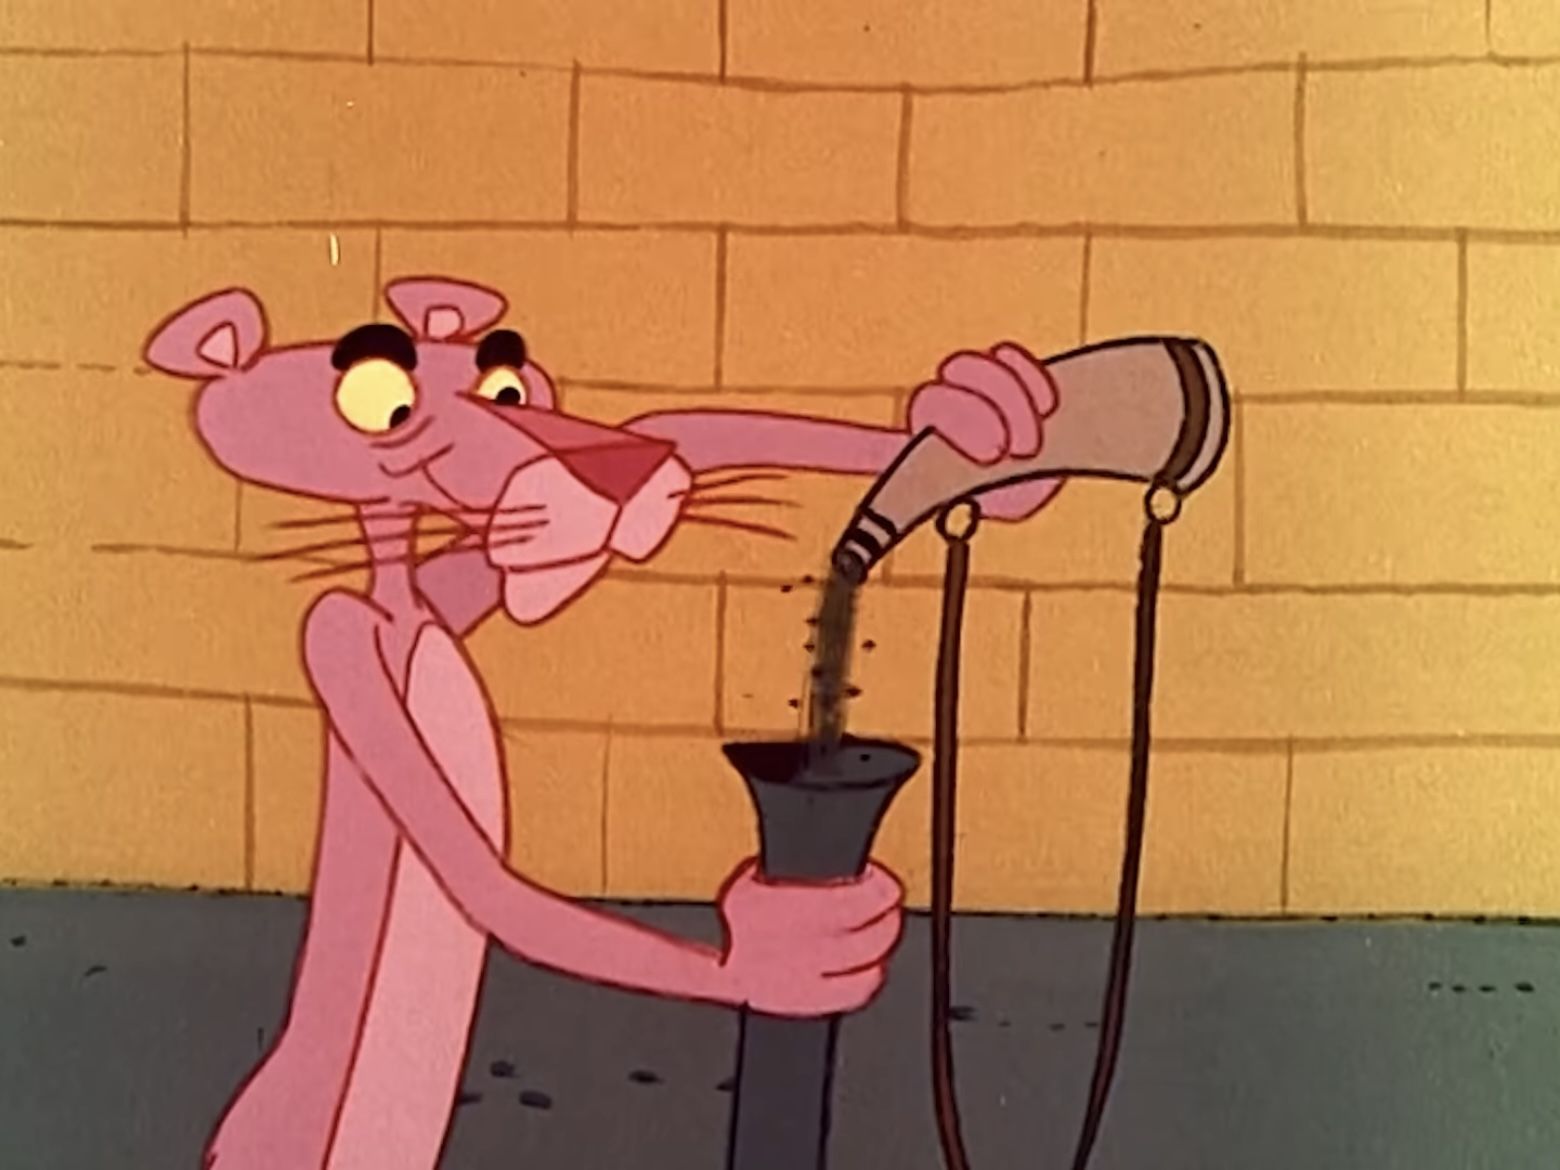 The Pink Panther uses a hairdryer to dry his tail. - Pink Panther